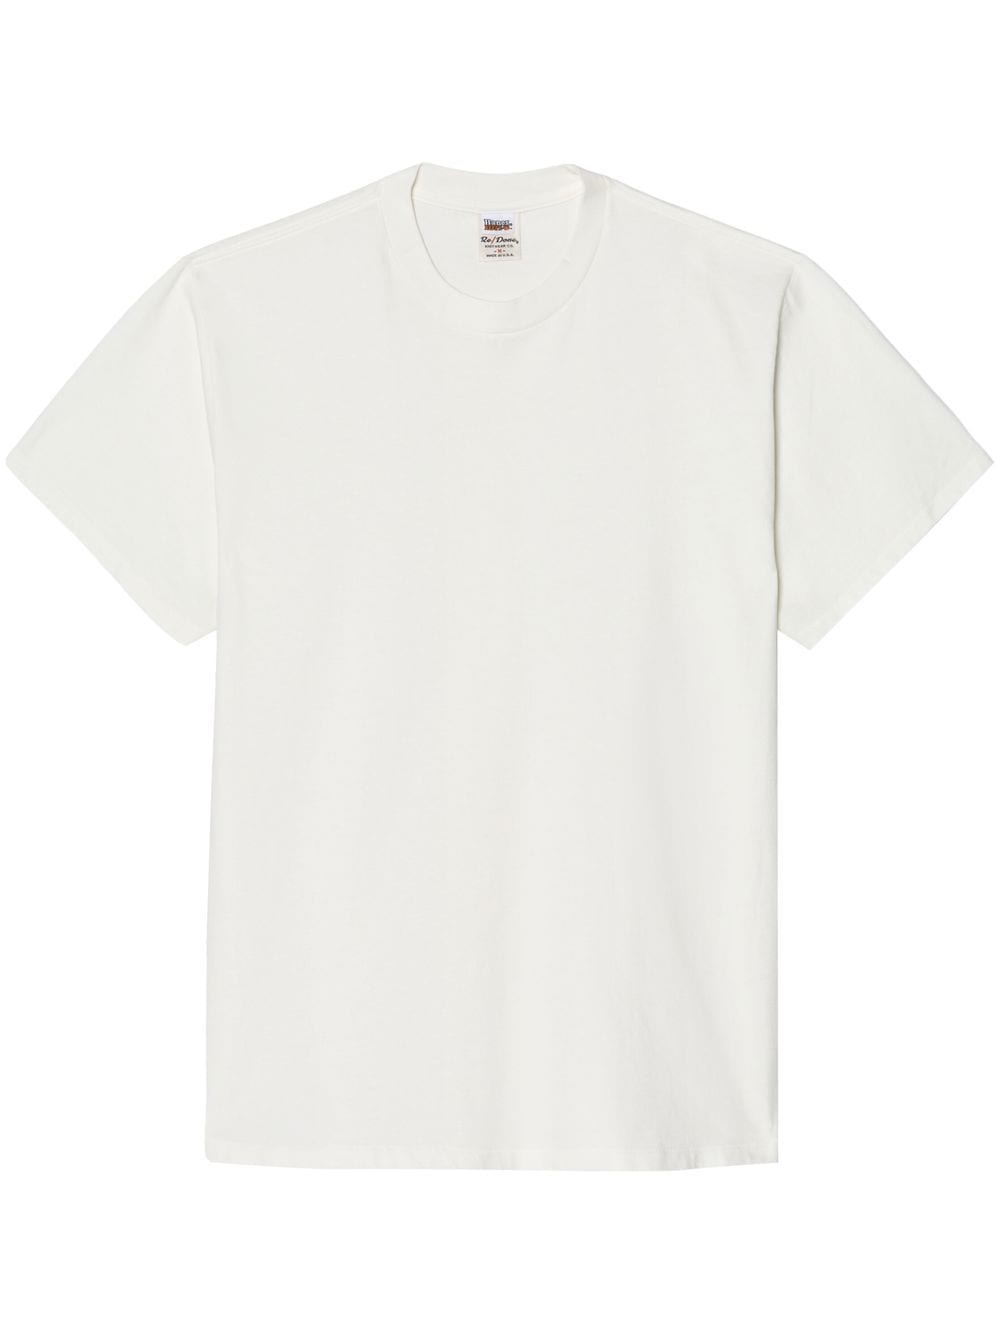 RE/DONE loose-fit crew neck T-shirt - White von RE/DONE